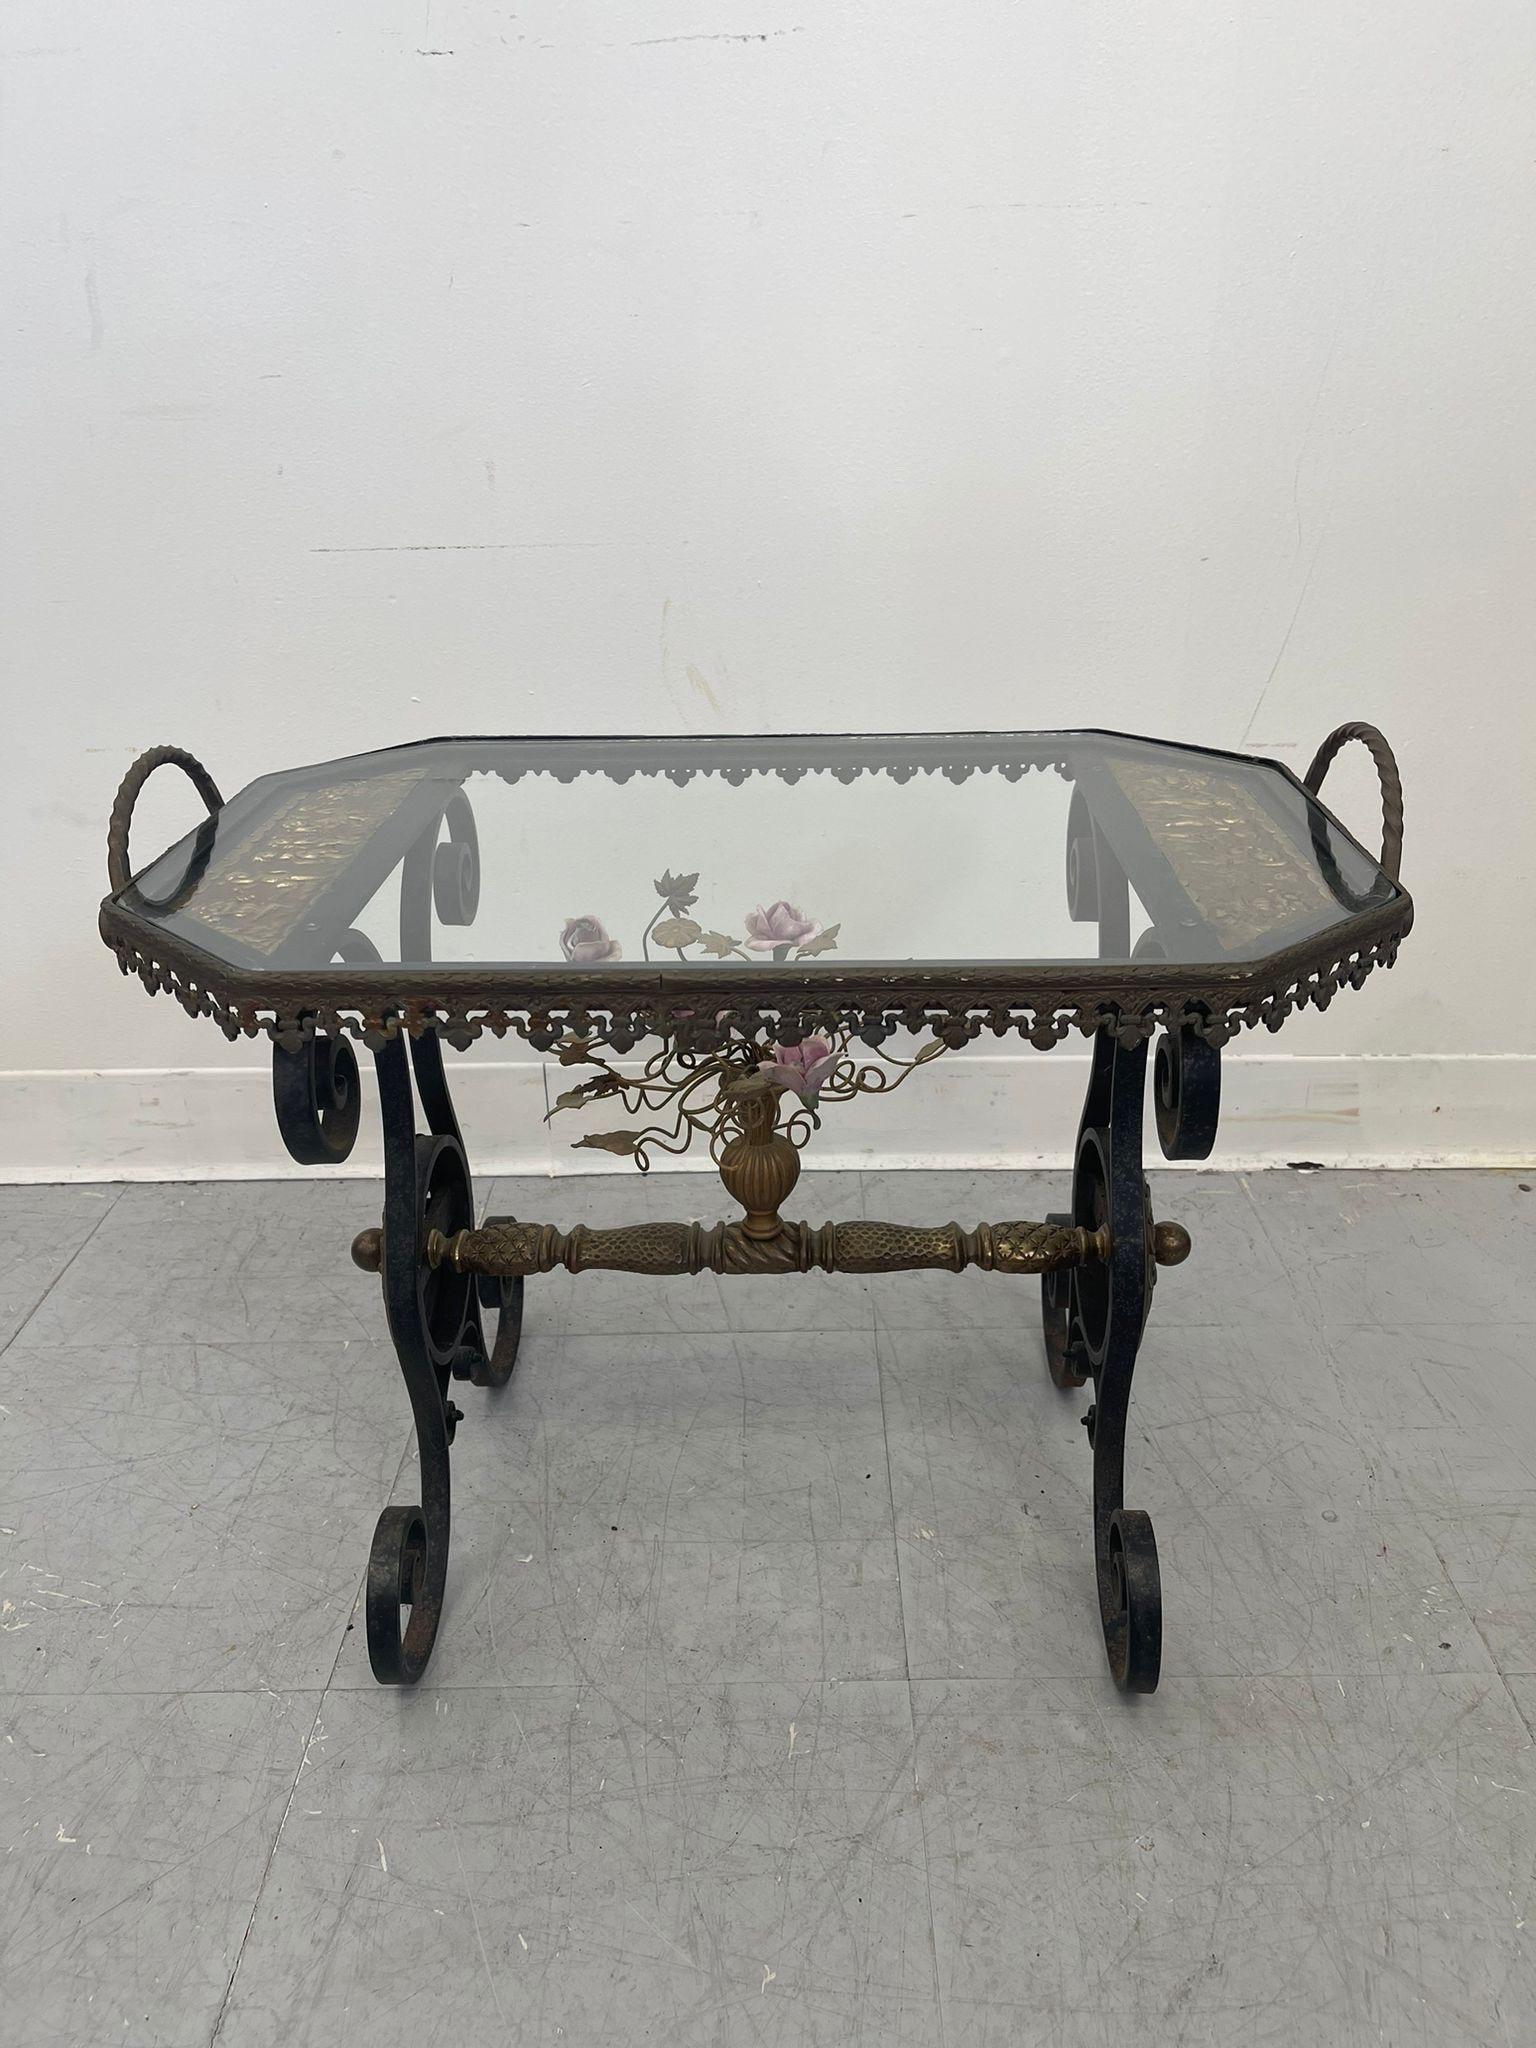 This elegant and unique Side Table features a removable glass tray with twisted iron handles. The base is a work of Art with spiral curved legs and central stretcher from which a gift metal urn with an bouquet of iron flowers rests. The top has two